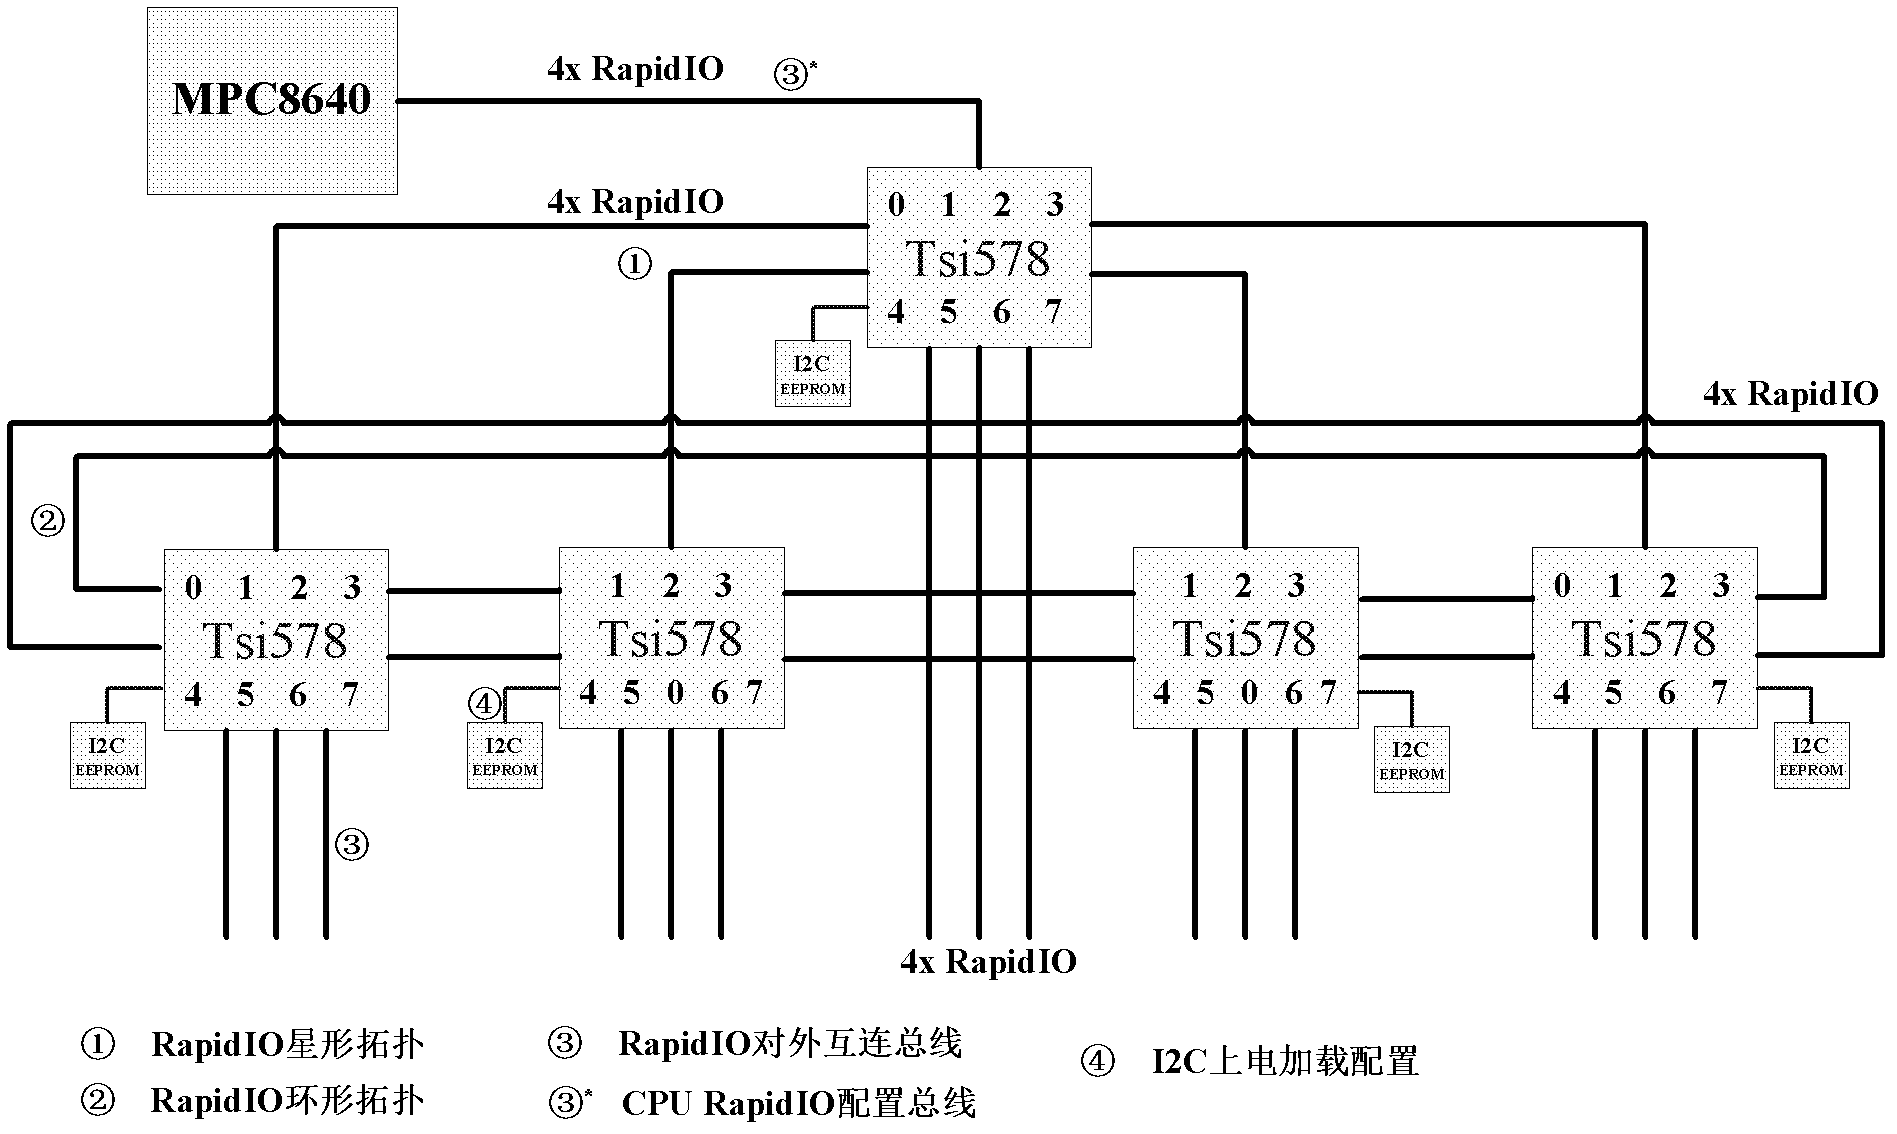 System structure based on Rapid IO (Input Output) protocol packet exchange